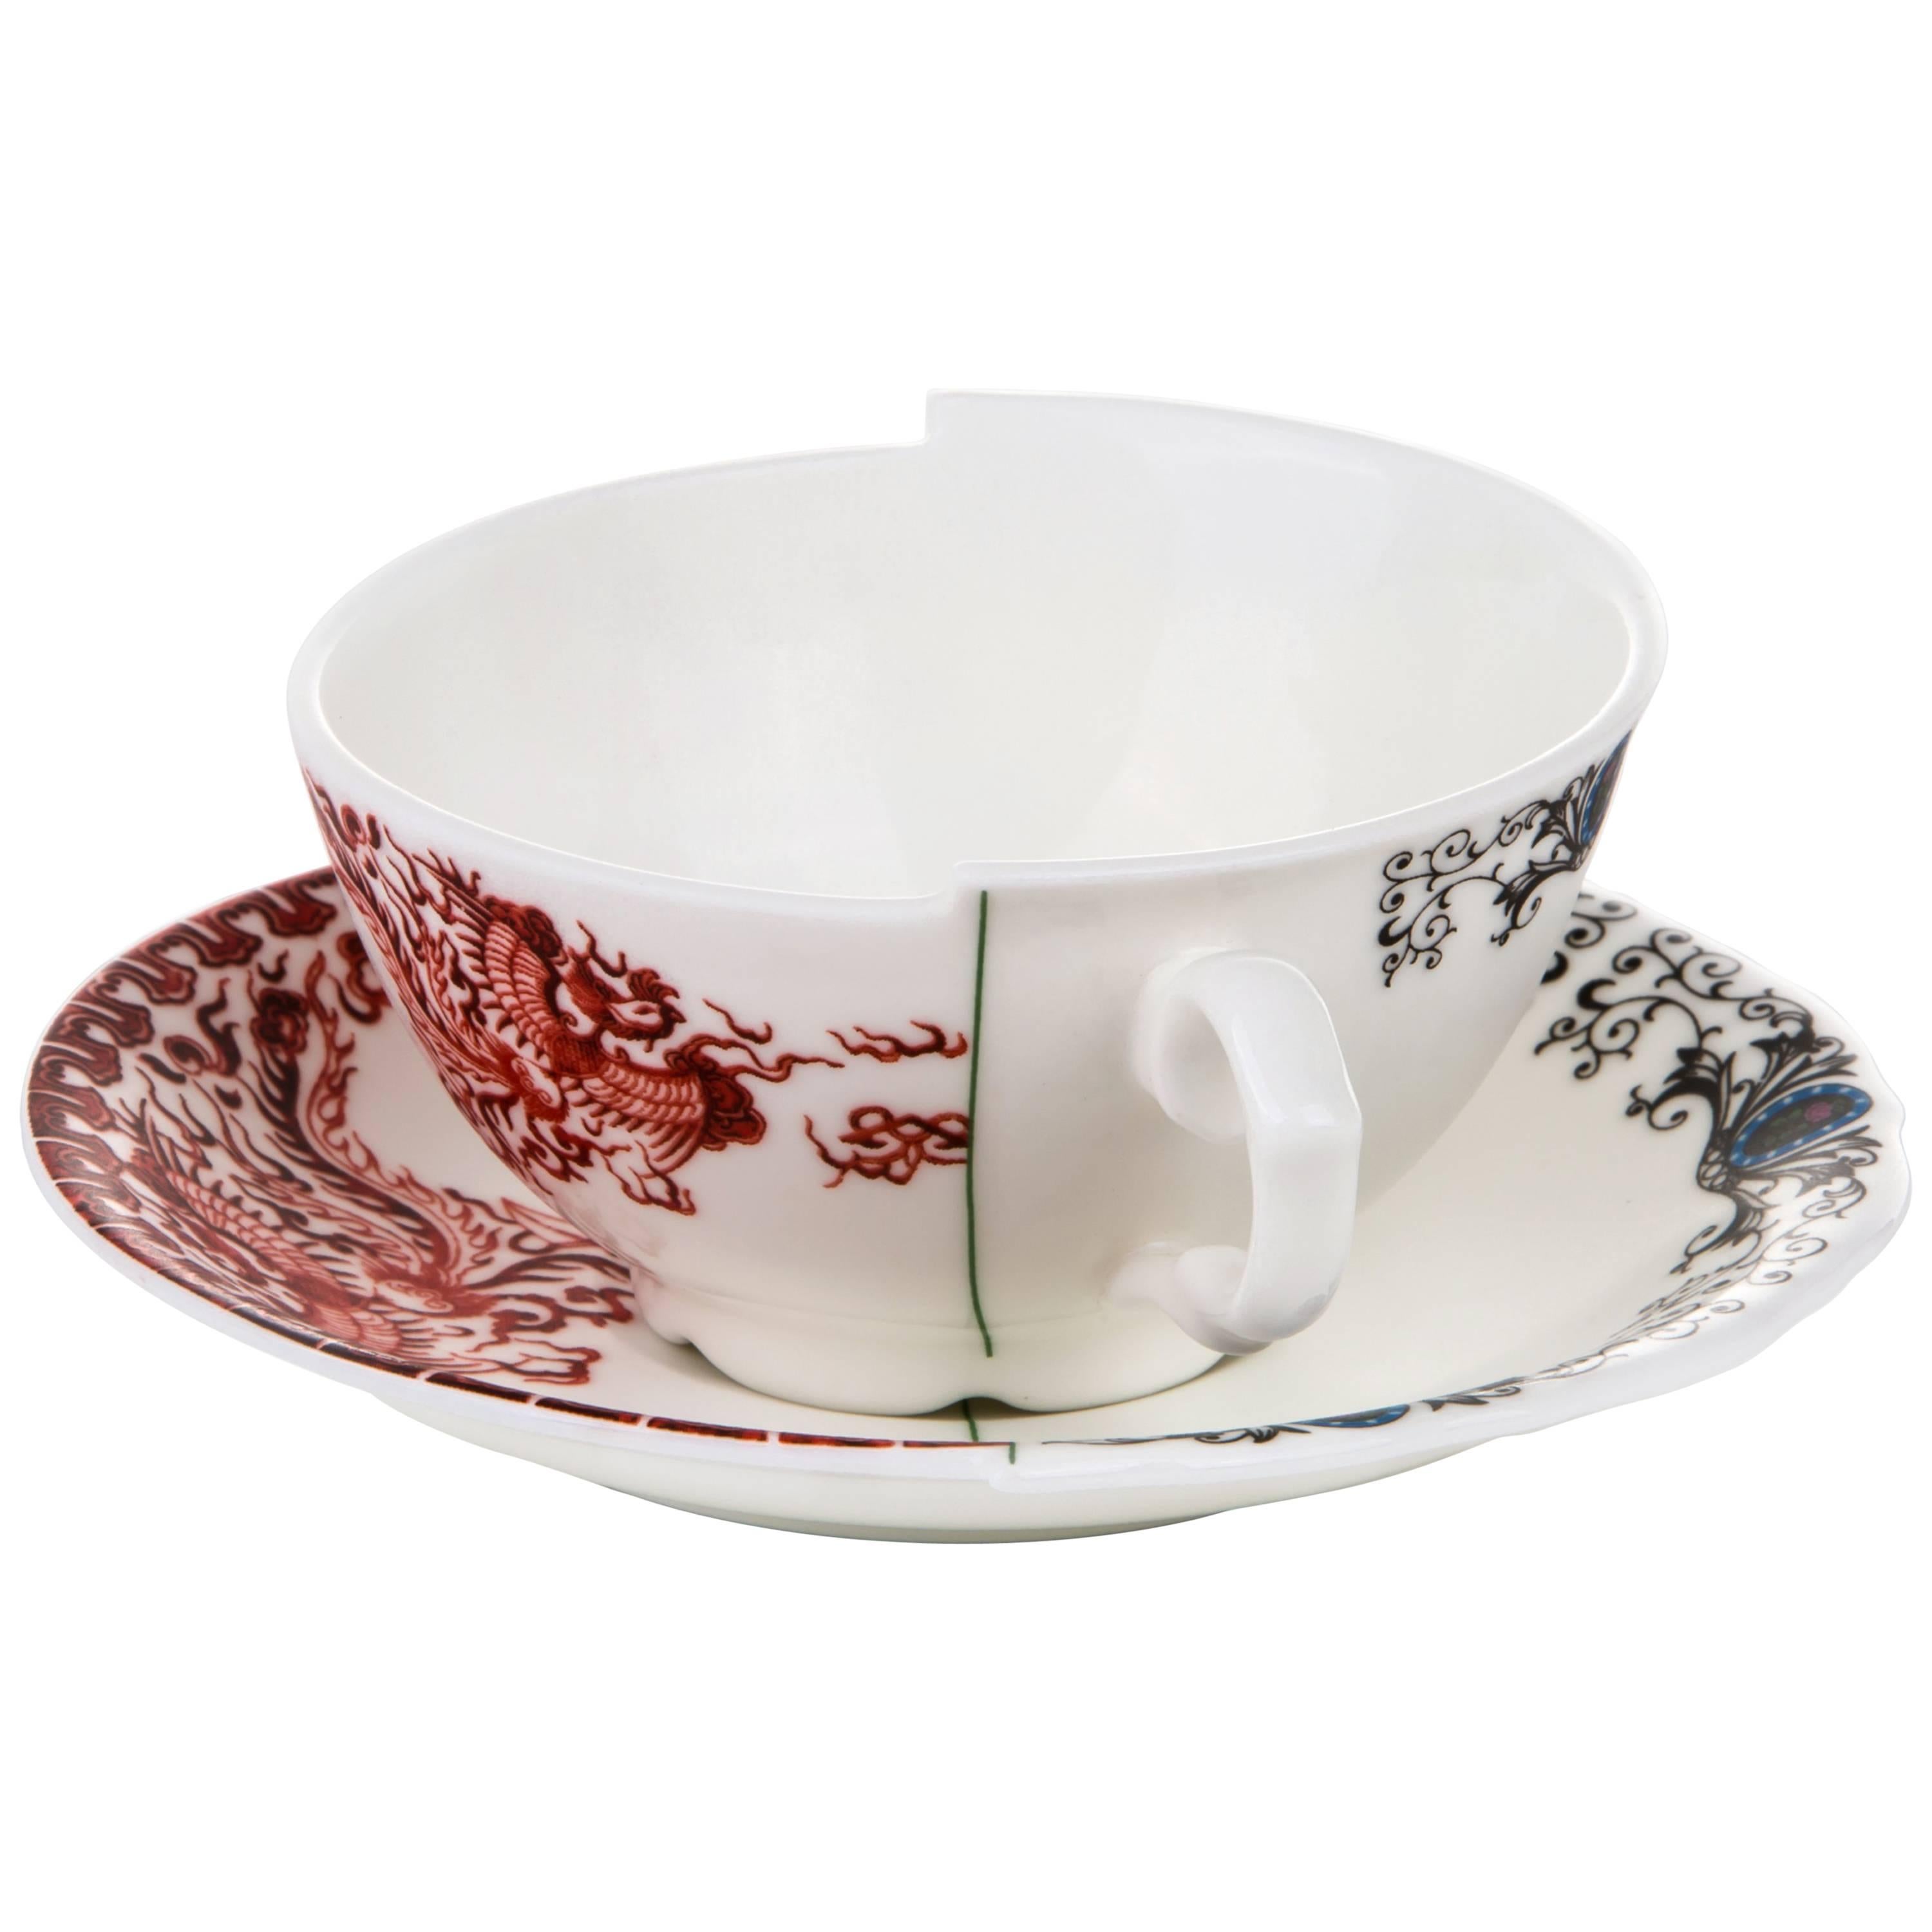 Seletti "Hybrid-Zora" Teacup with Saucer in Porcelain